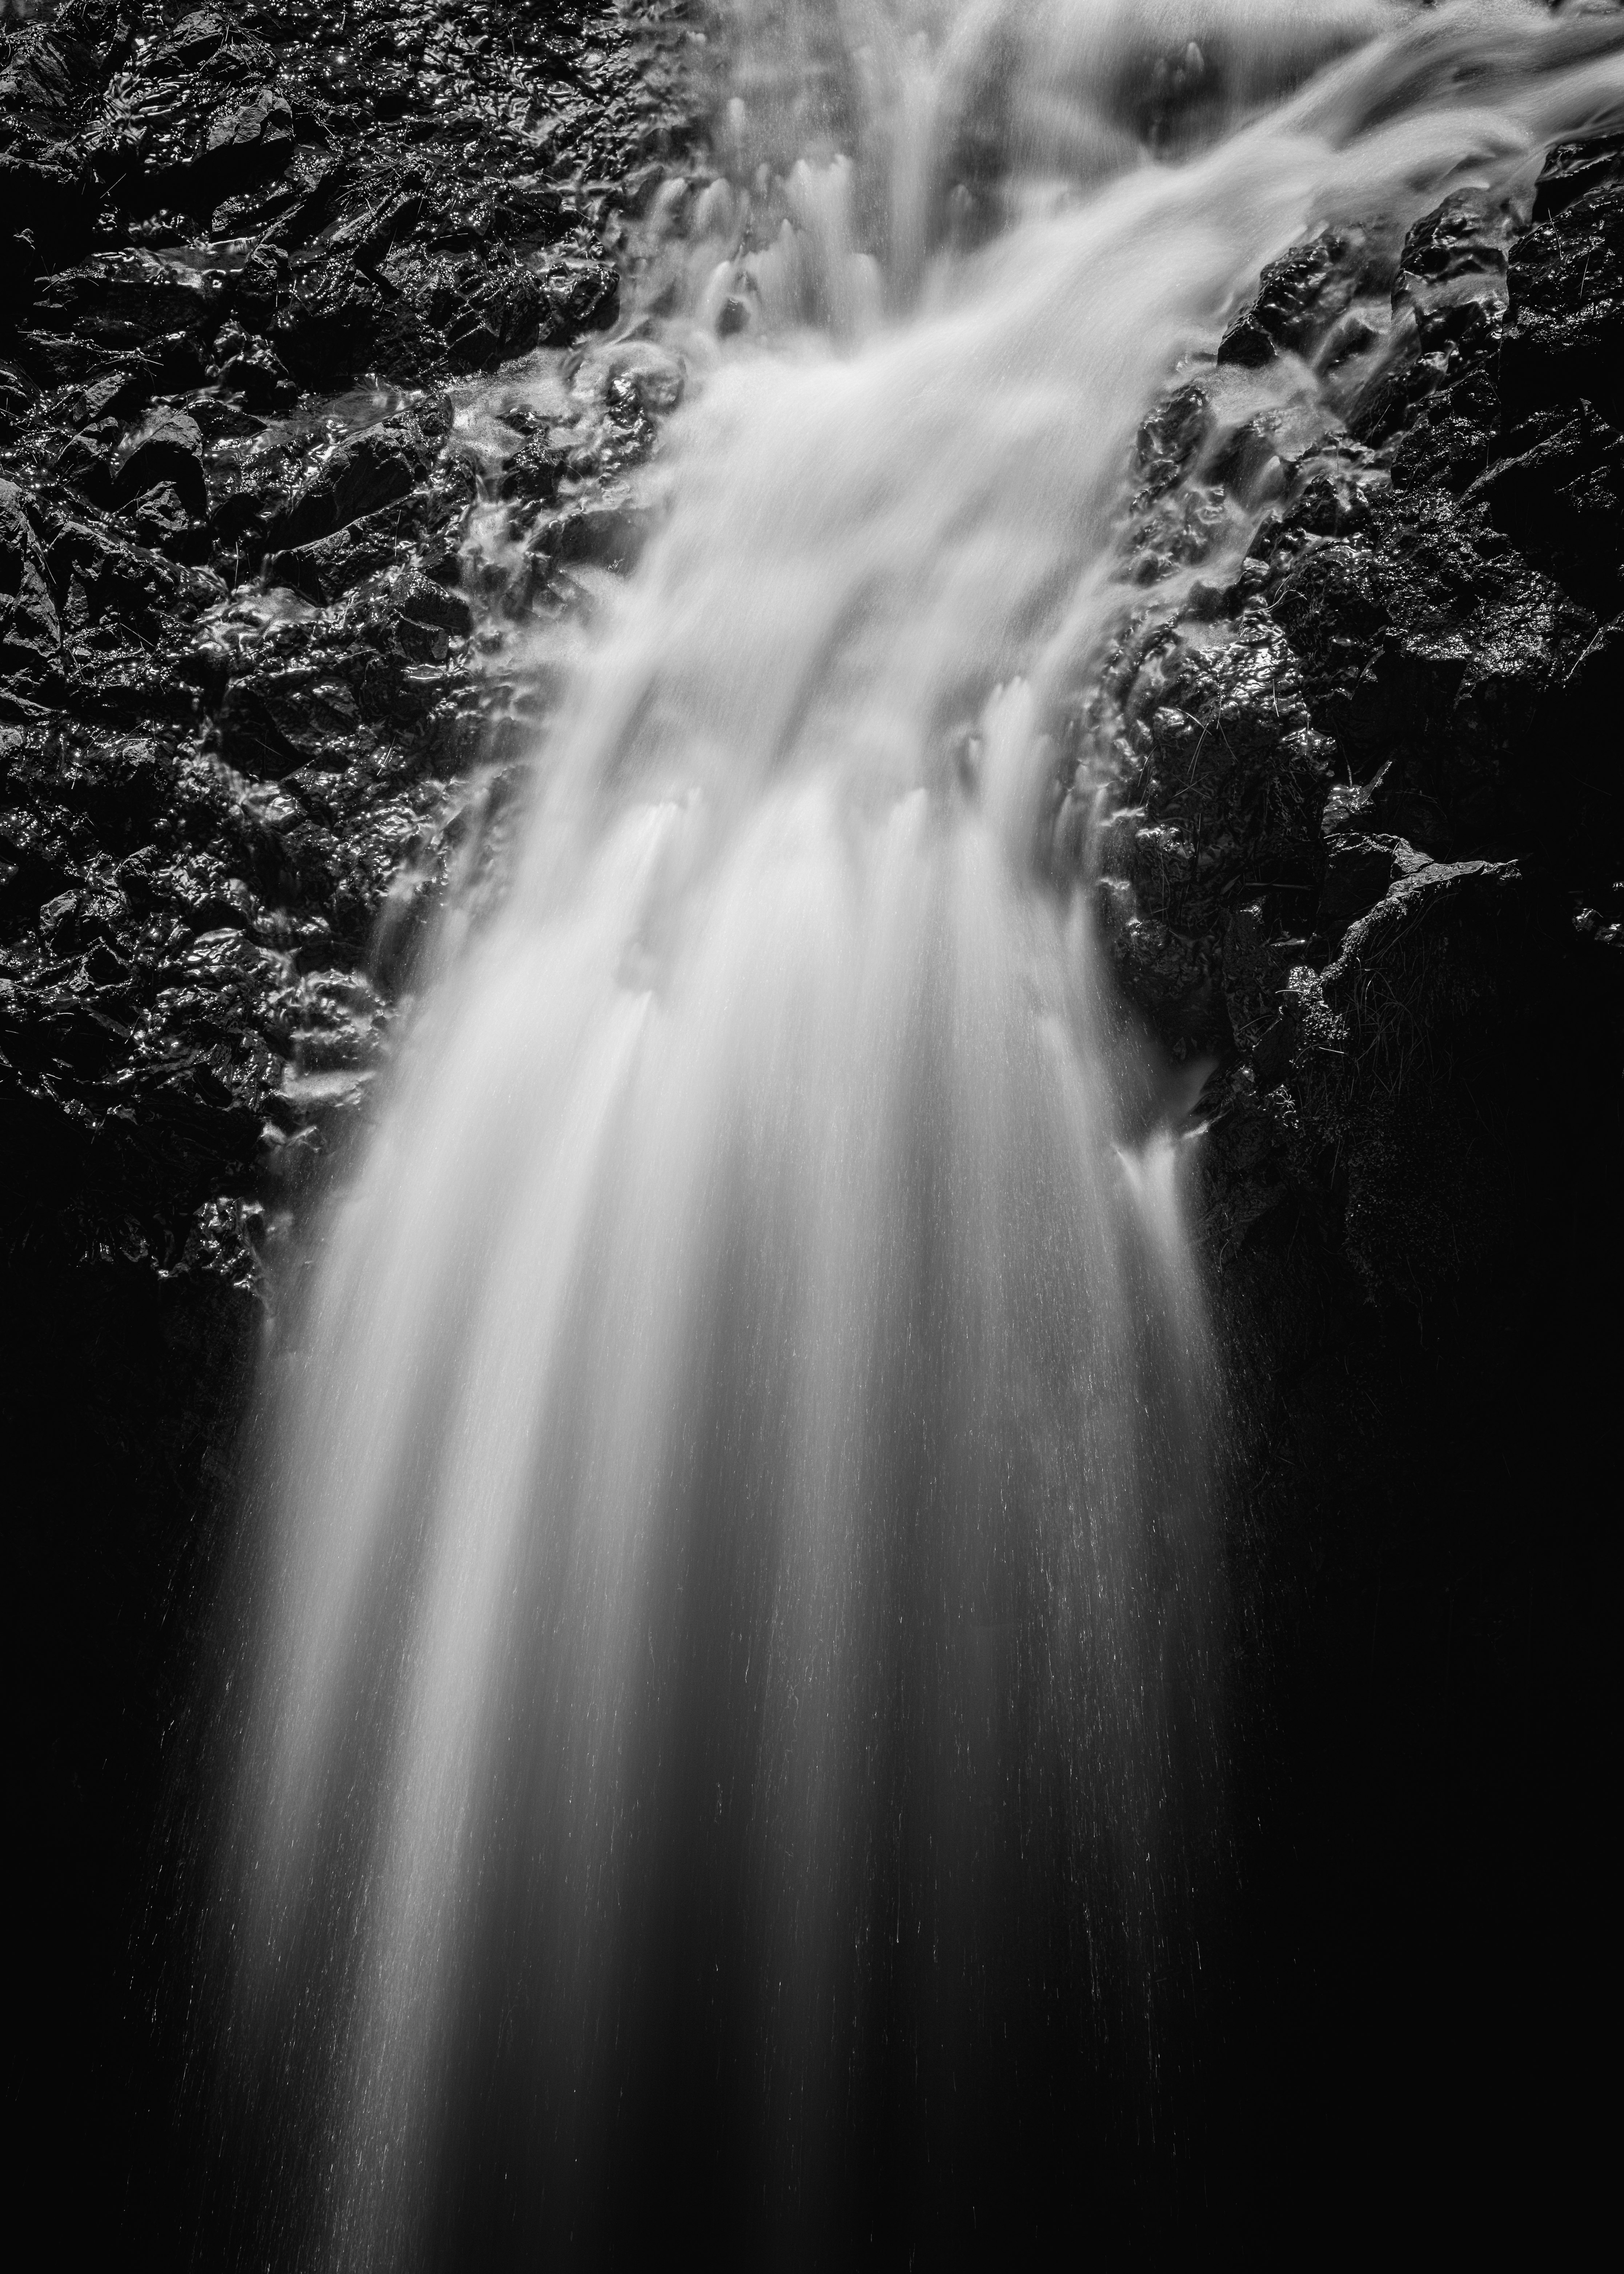 grayscale photo of water falls